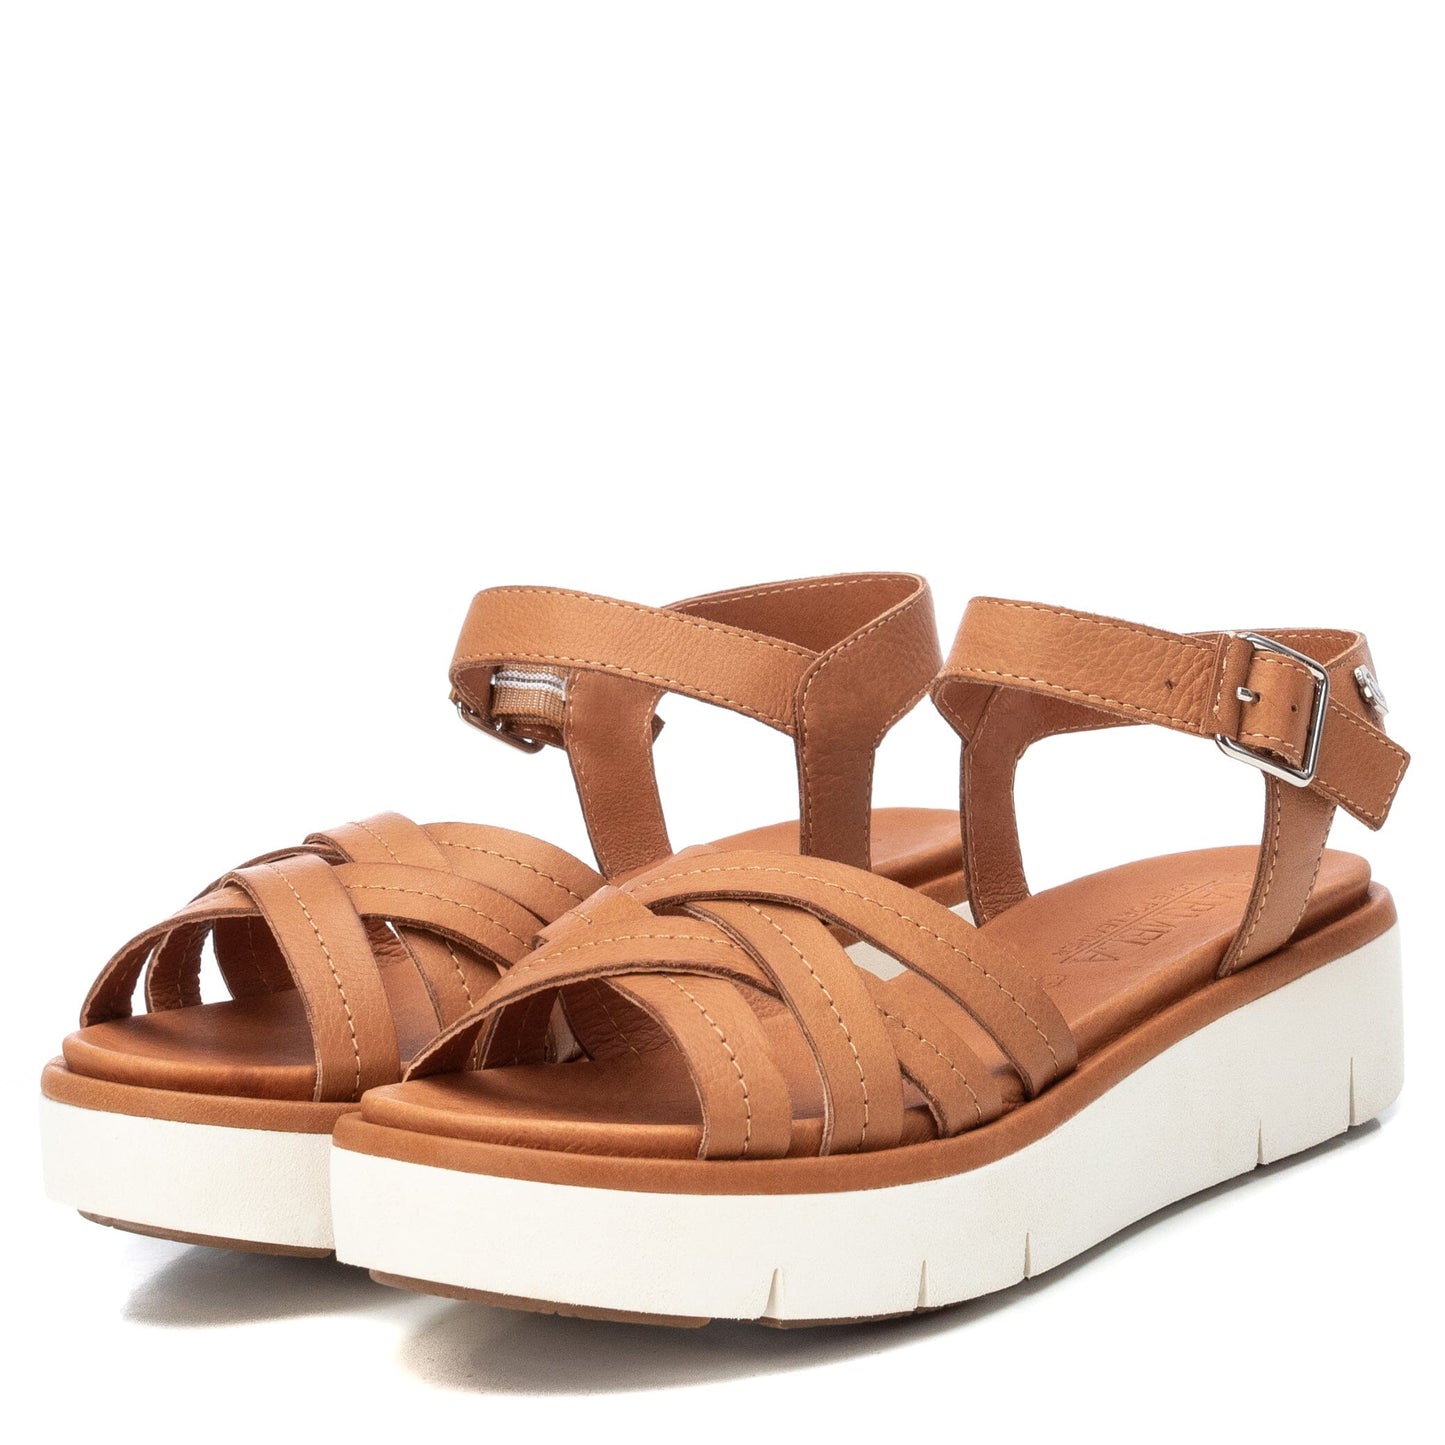 68421 Spanish leather sandals with comfort wedge in Brown sandals Sam Star Shoes 